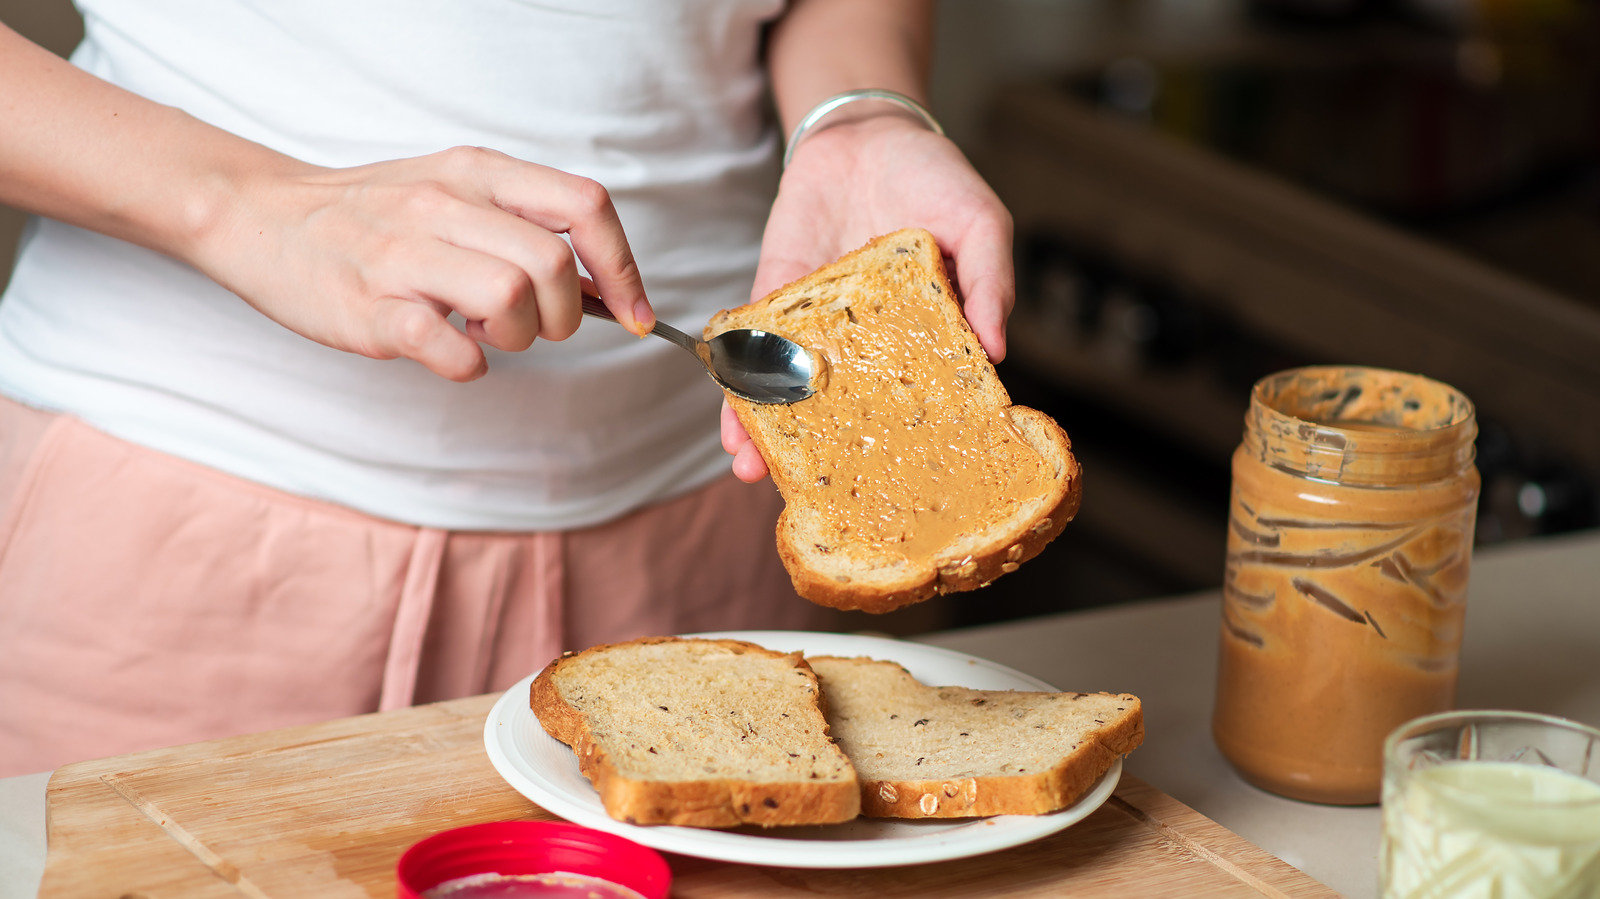 When You Stop Eating Peanut Butter, This Is What Happens To Your Blood Sugar - Health Digest